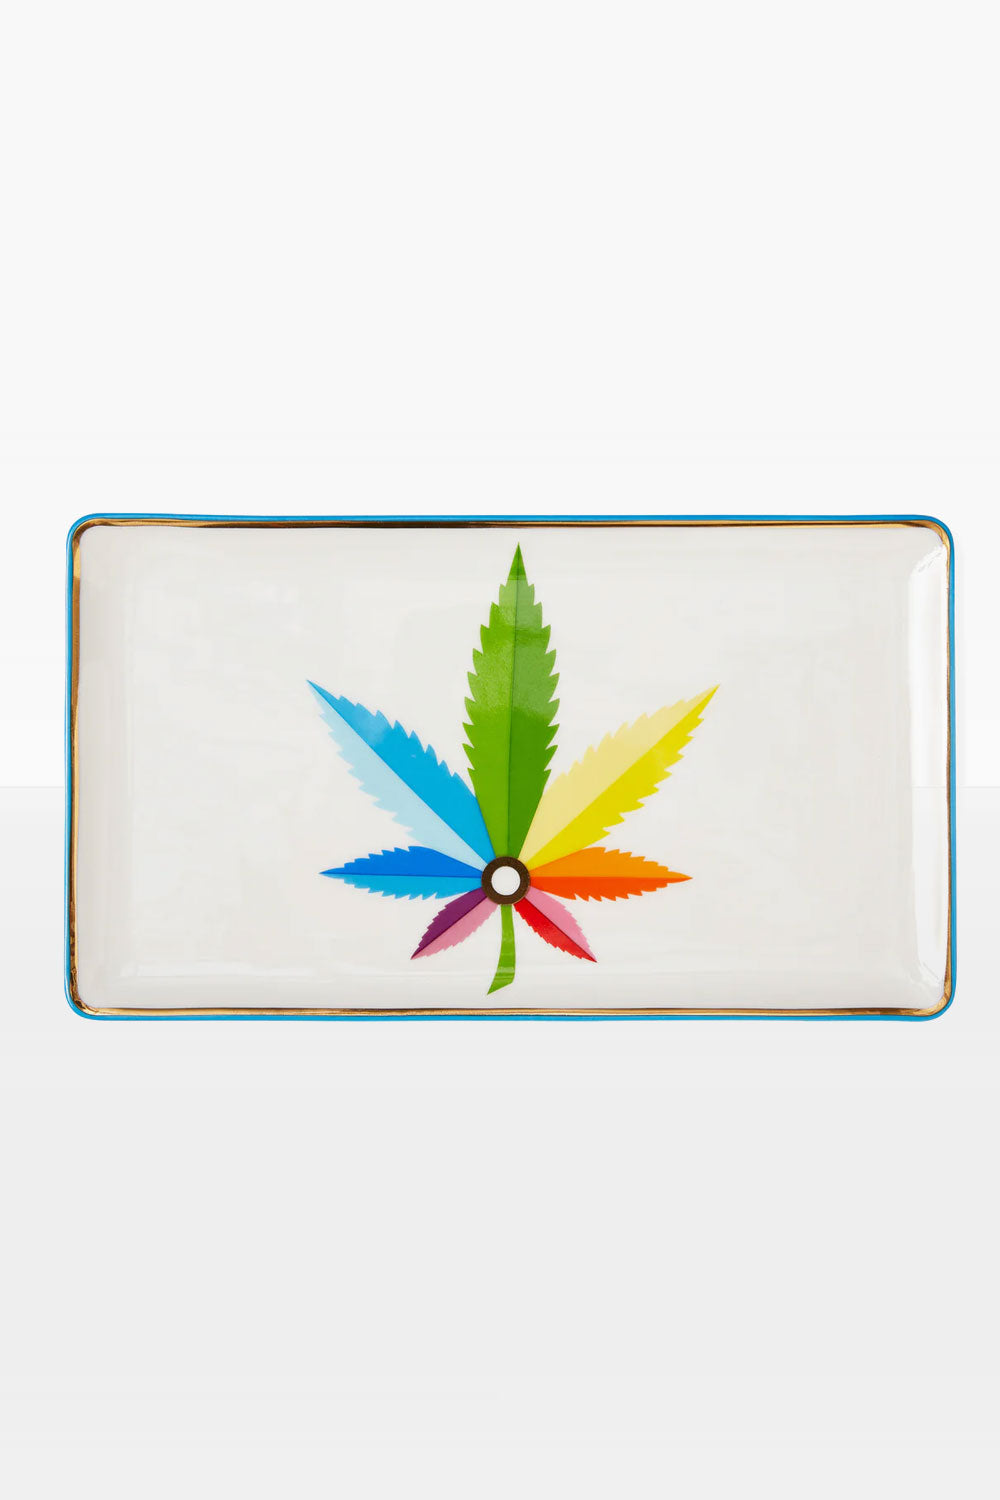 Artfully Crafted Rolling Trays, Papers, and Lighters